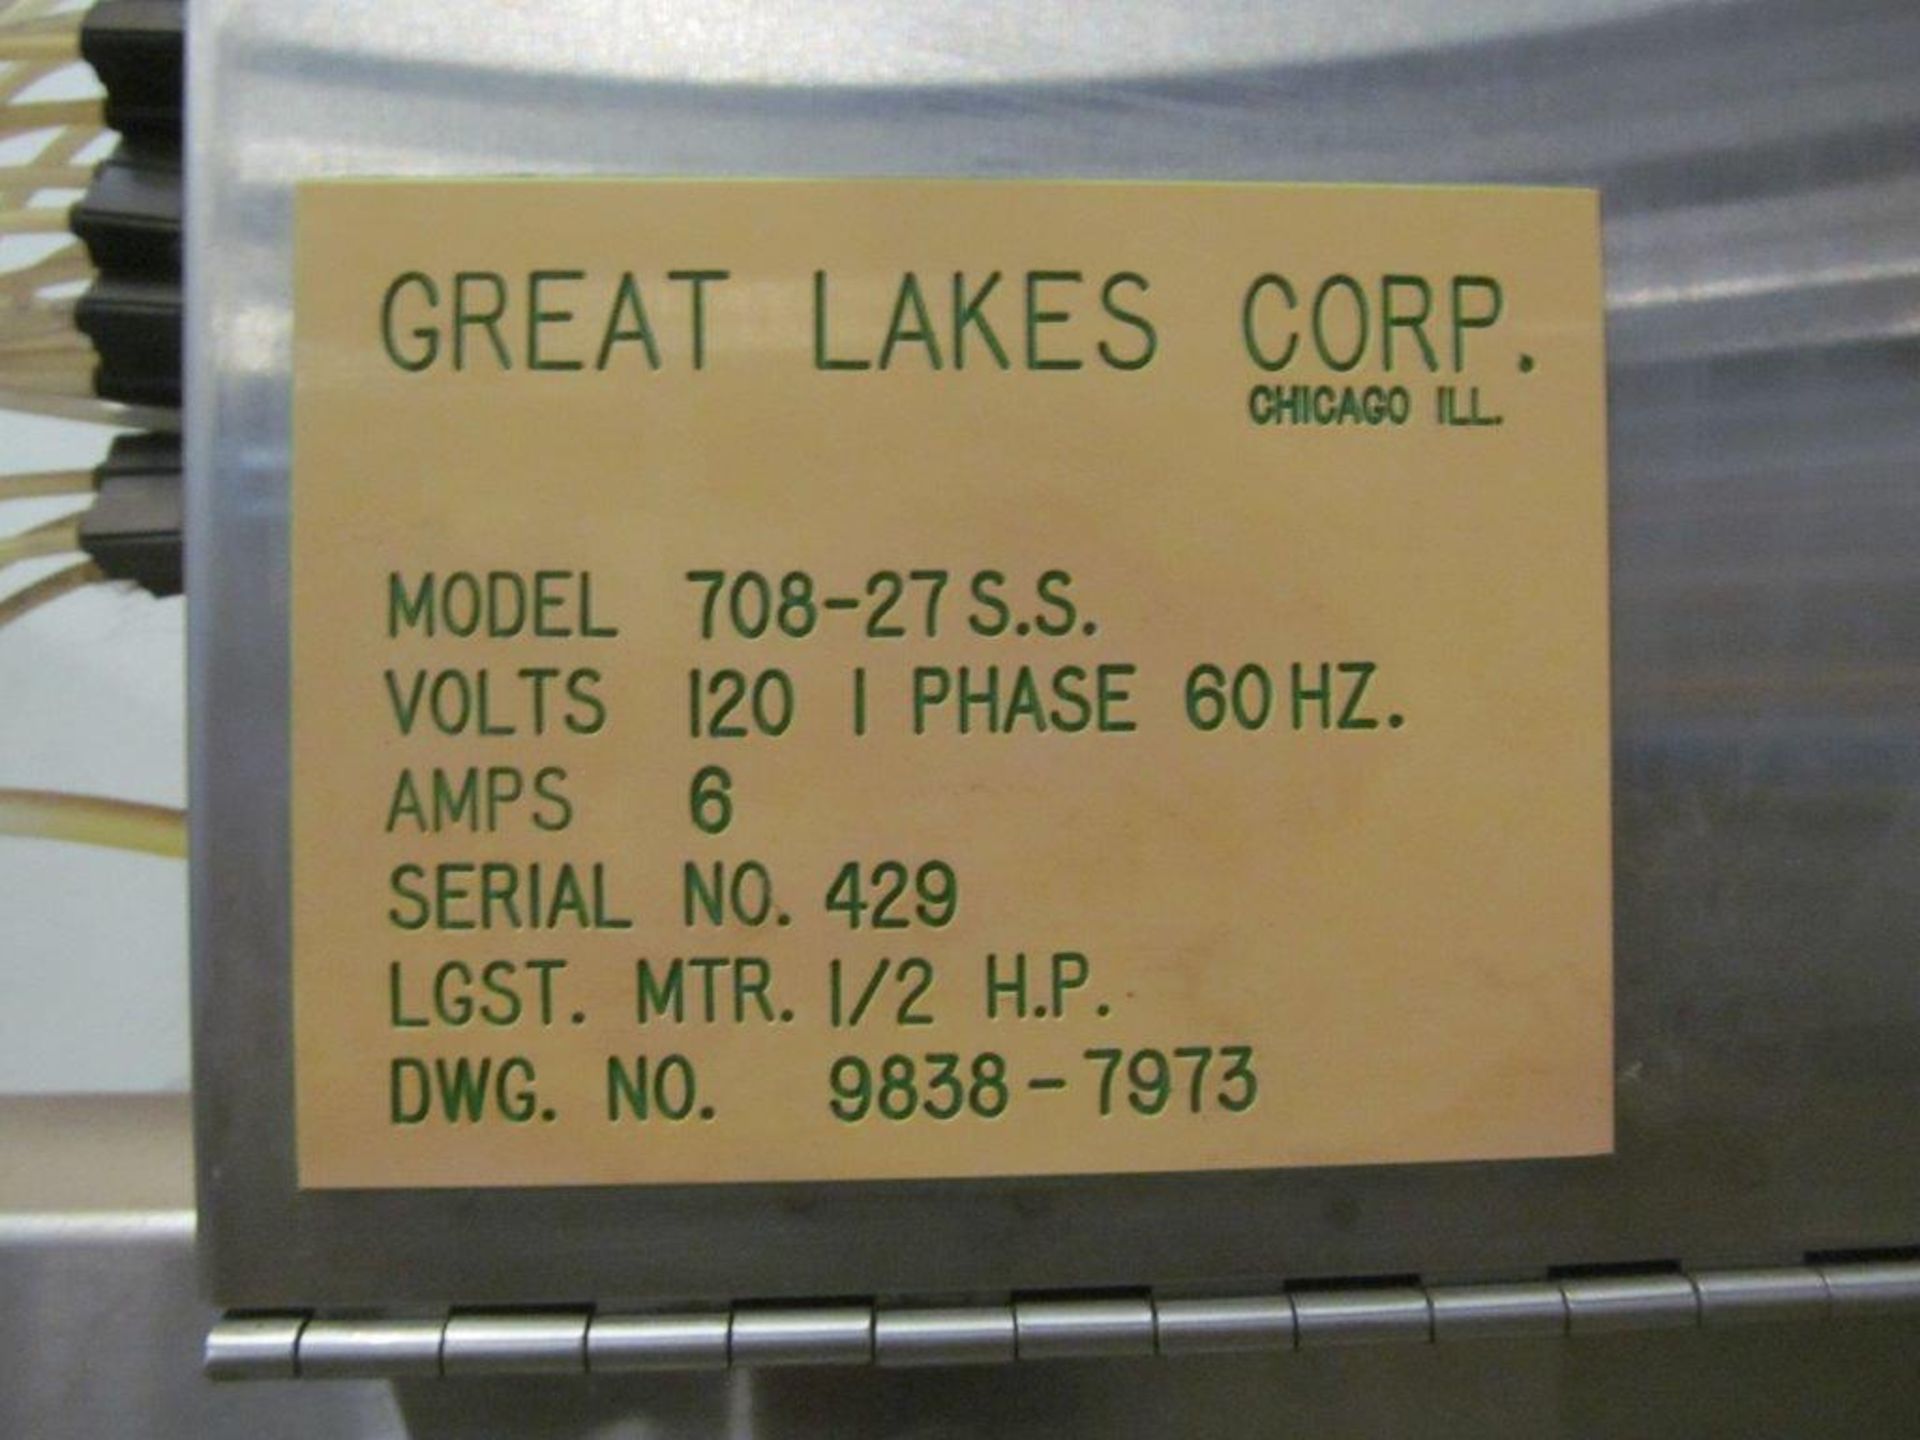 GREAT LAKES CORP. (U.S.A), S/S PLASTIC FOIL AUTO CLAMPER, MODEL 708-27SS, S/N 429, ELECTRICS 120V/ - Image 6 of 6